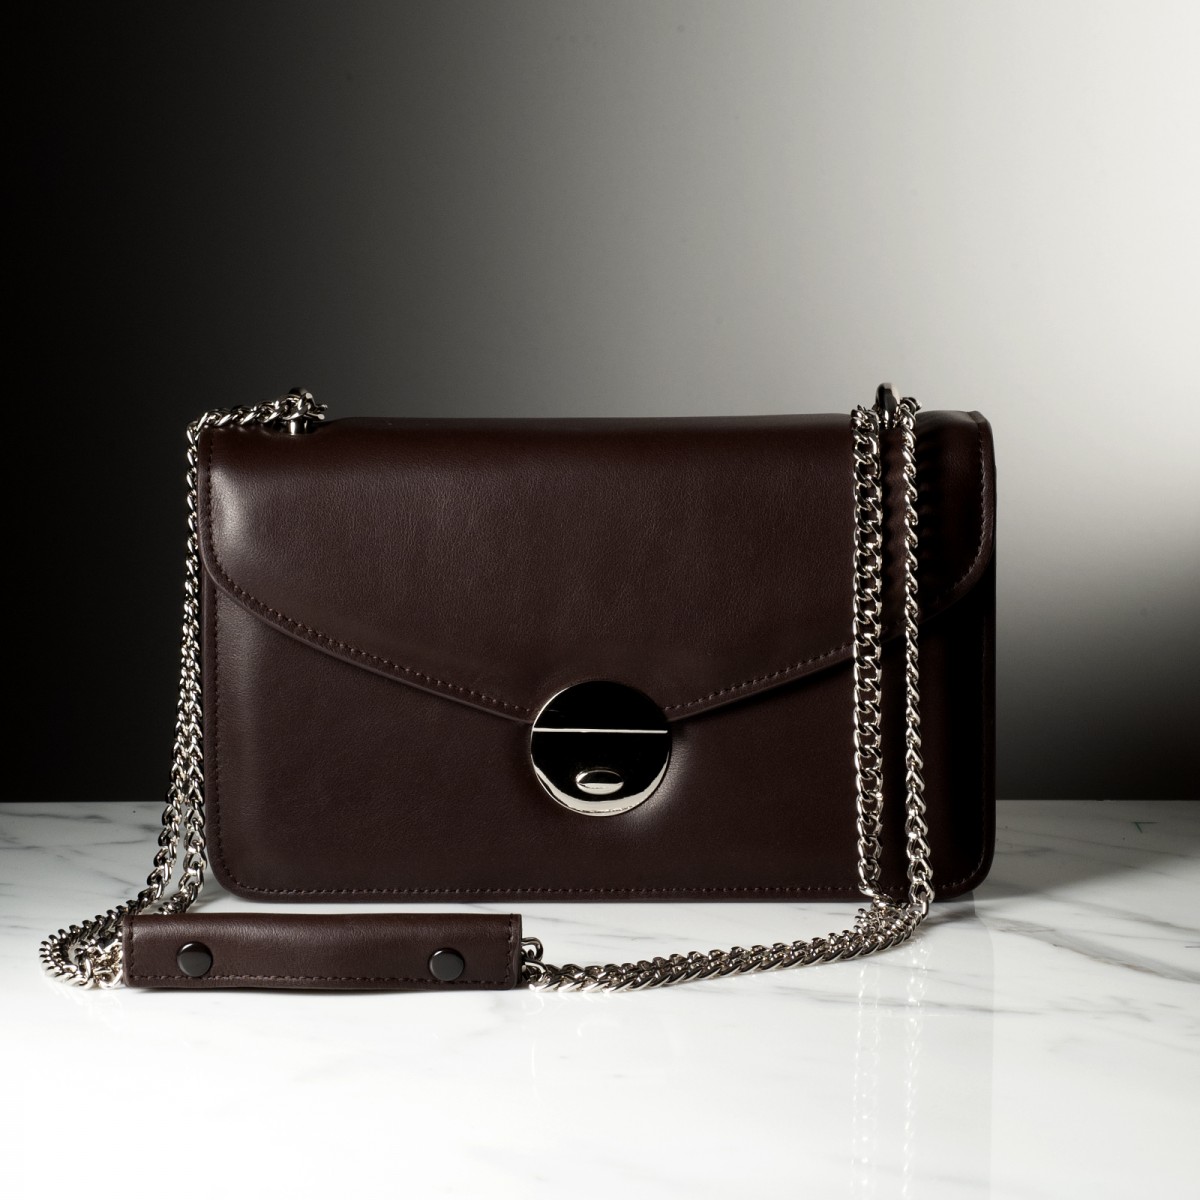 GIULIA leather - smooth calfskin leather bag, handmade in Italy